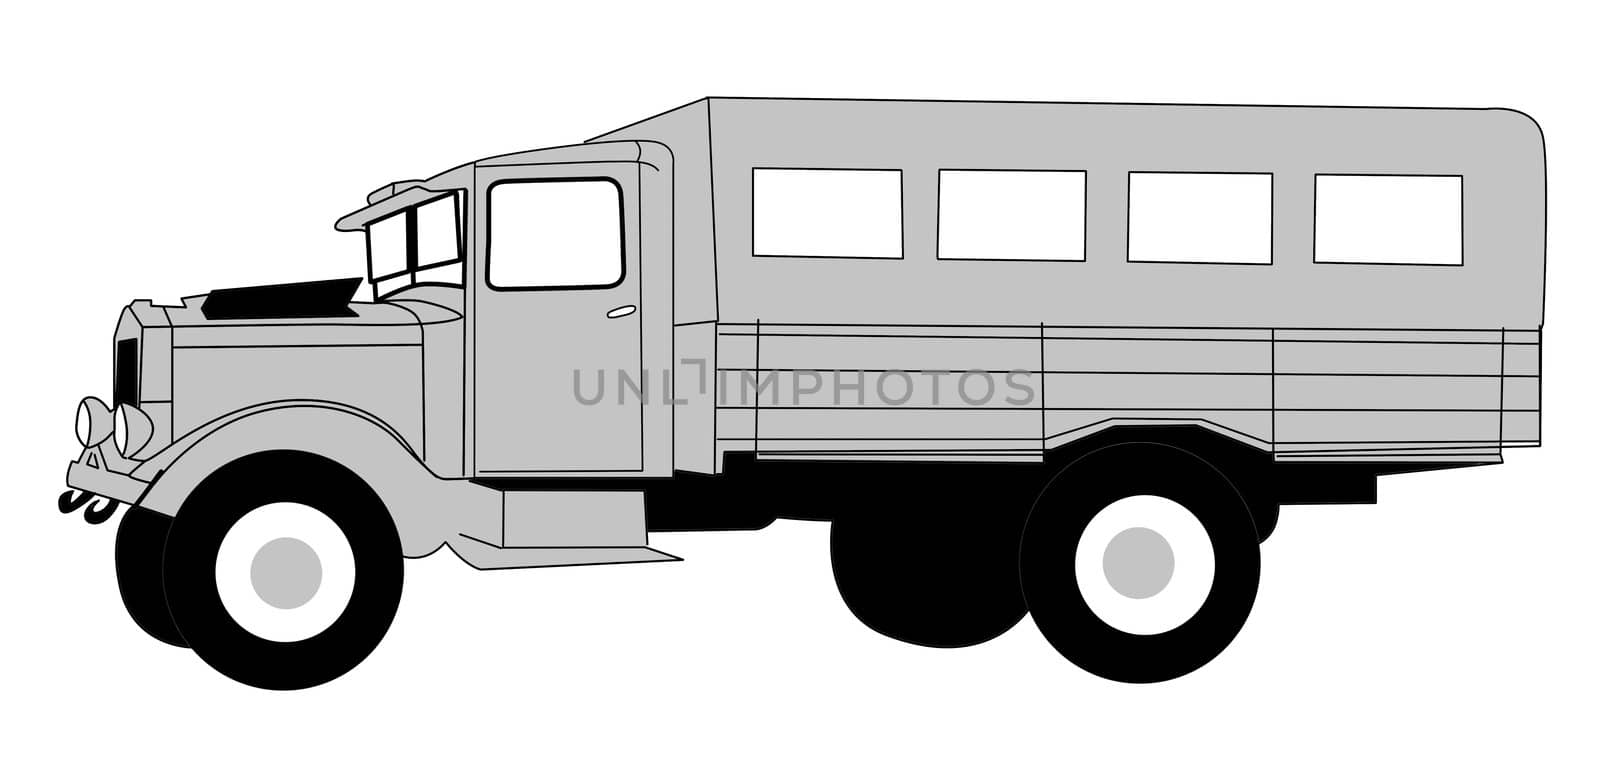 retro car on white background, vector illustration by basel101658